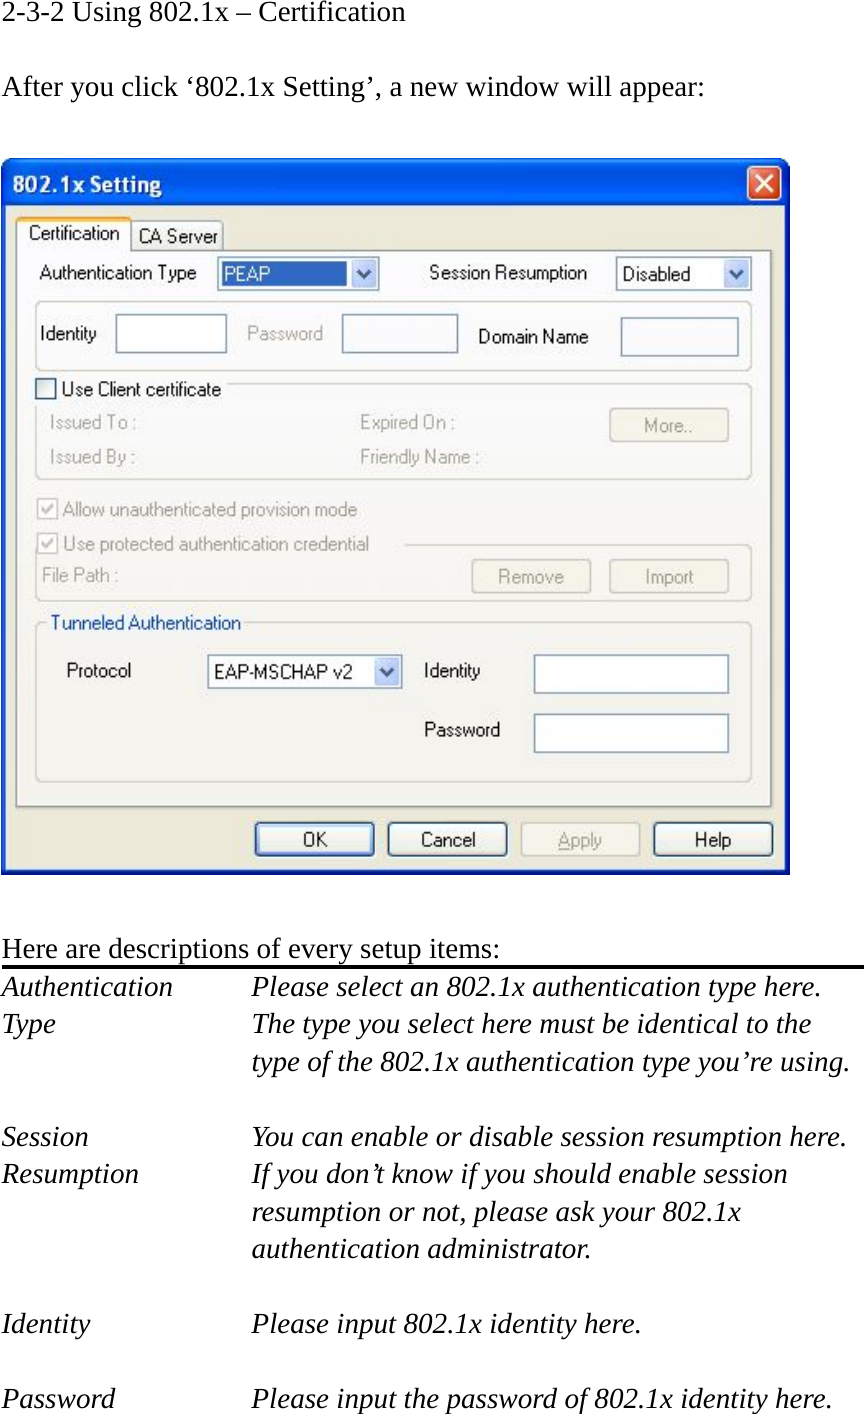 2-3-2 Using 802.1x – Certification  After you click ‘802.1x Setting’, a new window will appear:    Here are descriptions of every setup items: Authentication    Please select an 802.1x authentication type here. Type        The type you select here must be identical to the type of the 802.1x authentication type you’re using.  Session        You can enable or disable session resumption here. Resumption  If you don’t know if you should enable session resumption or not, please ask your 802.1x authentication administrator.  Identity  Please input 802.1x identity here.  Password  Please input the password of 802.1x identity here. 